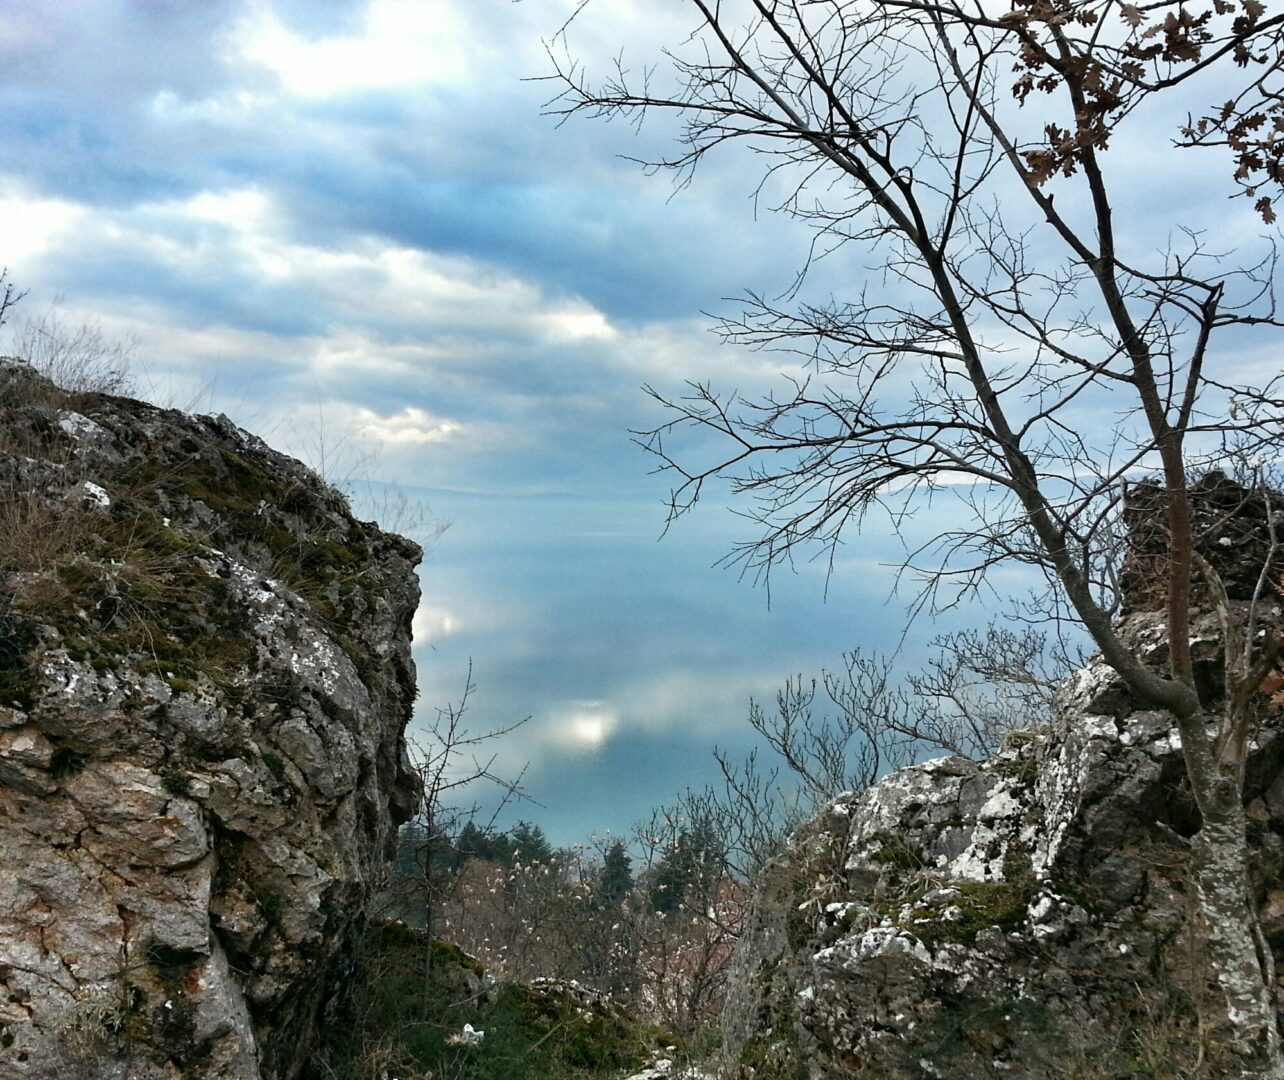 The view from St. Stephan monastery